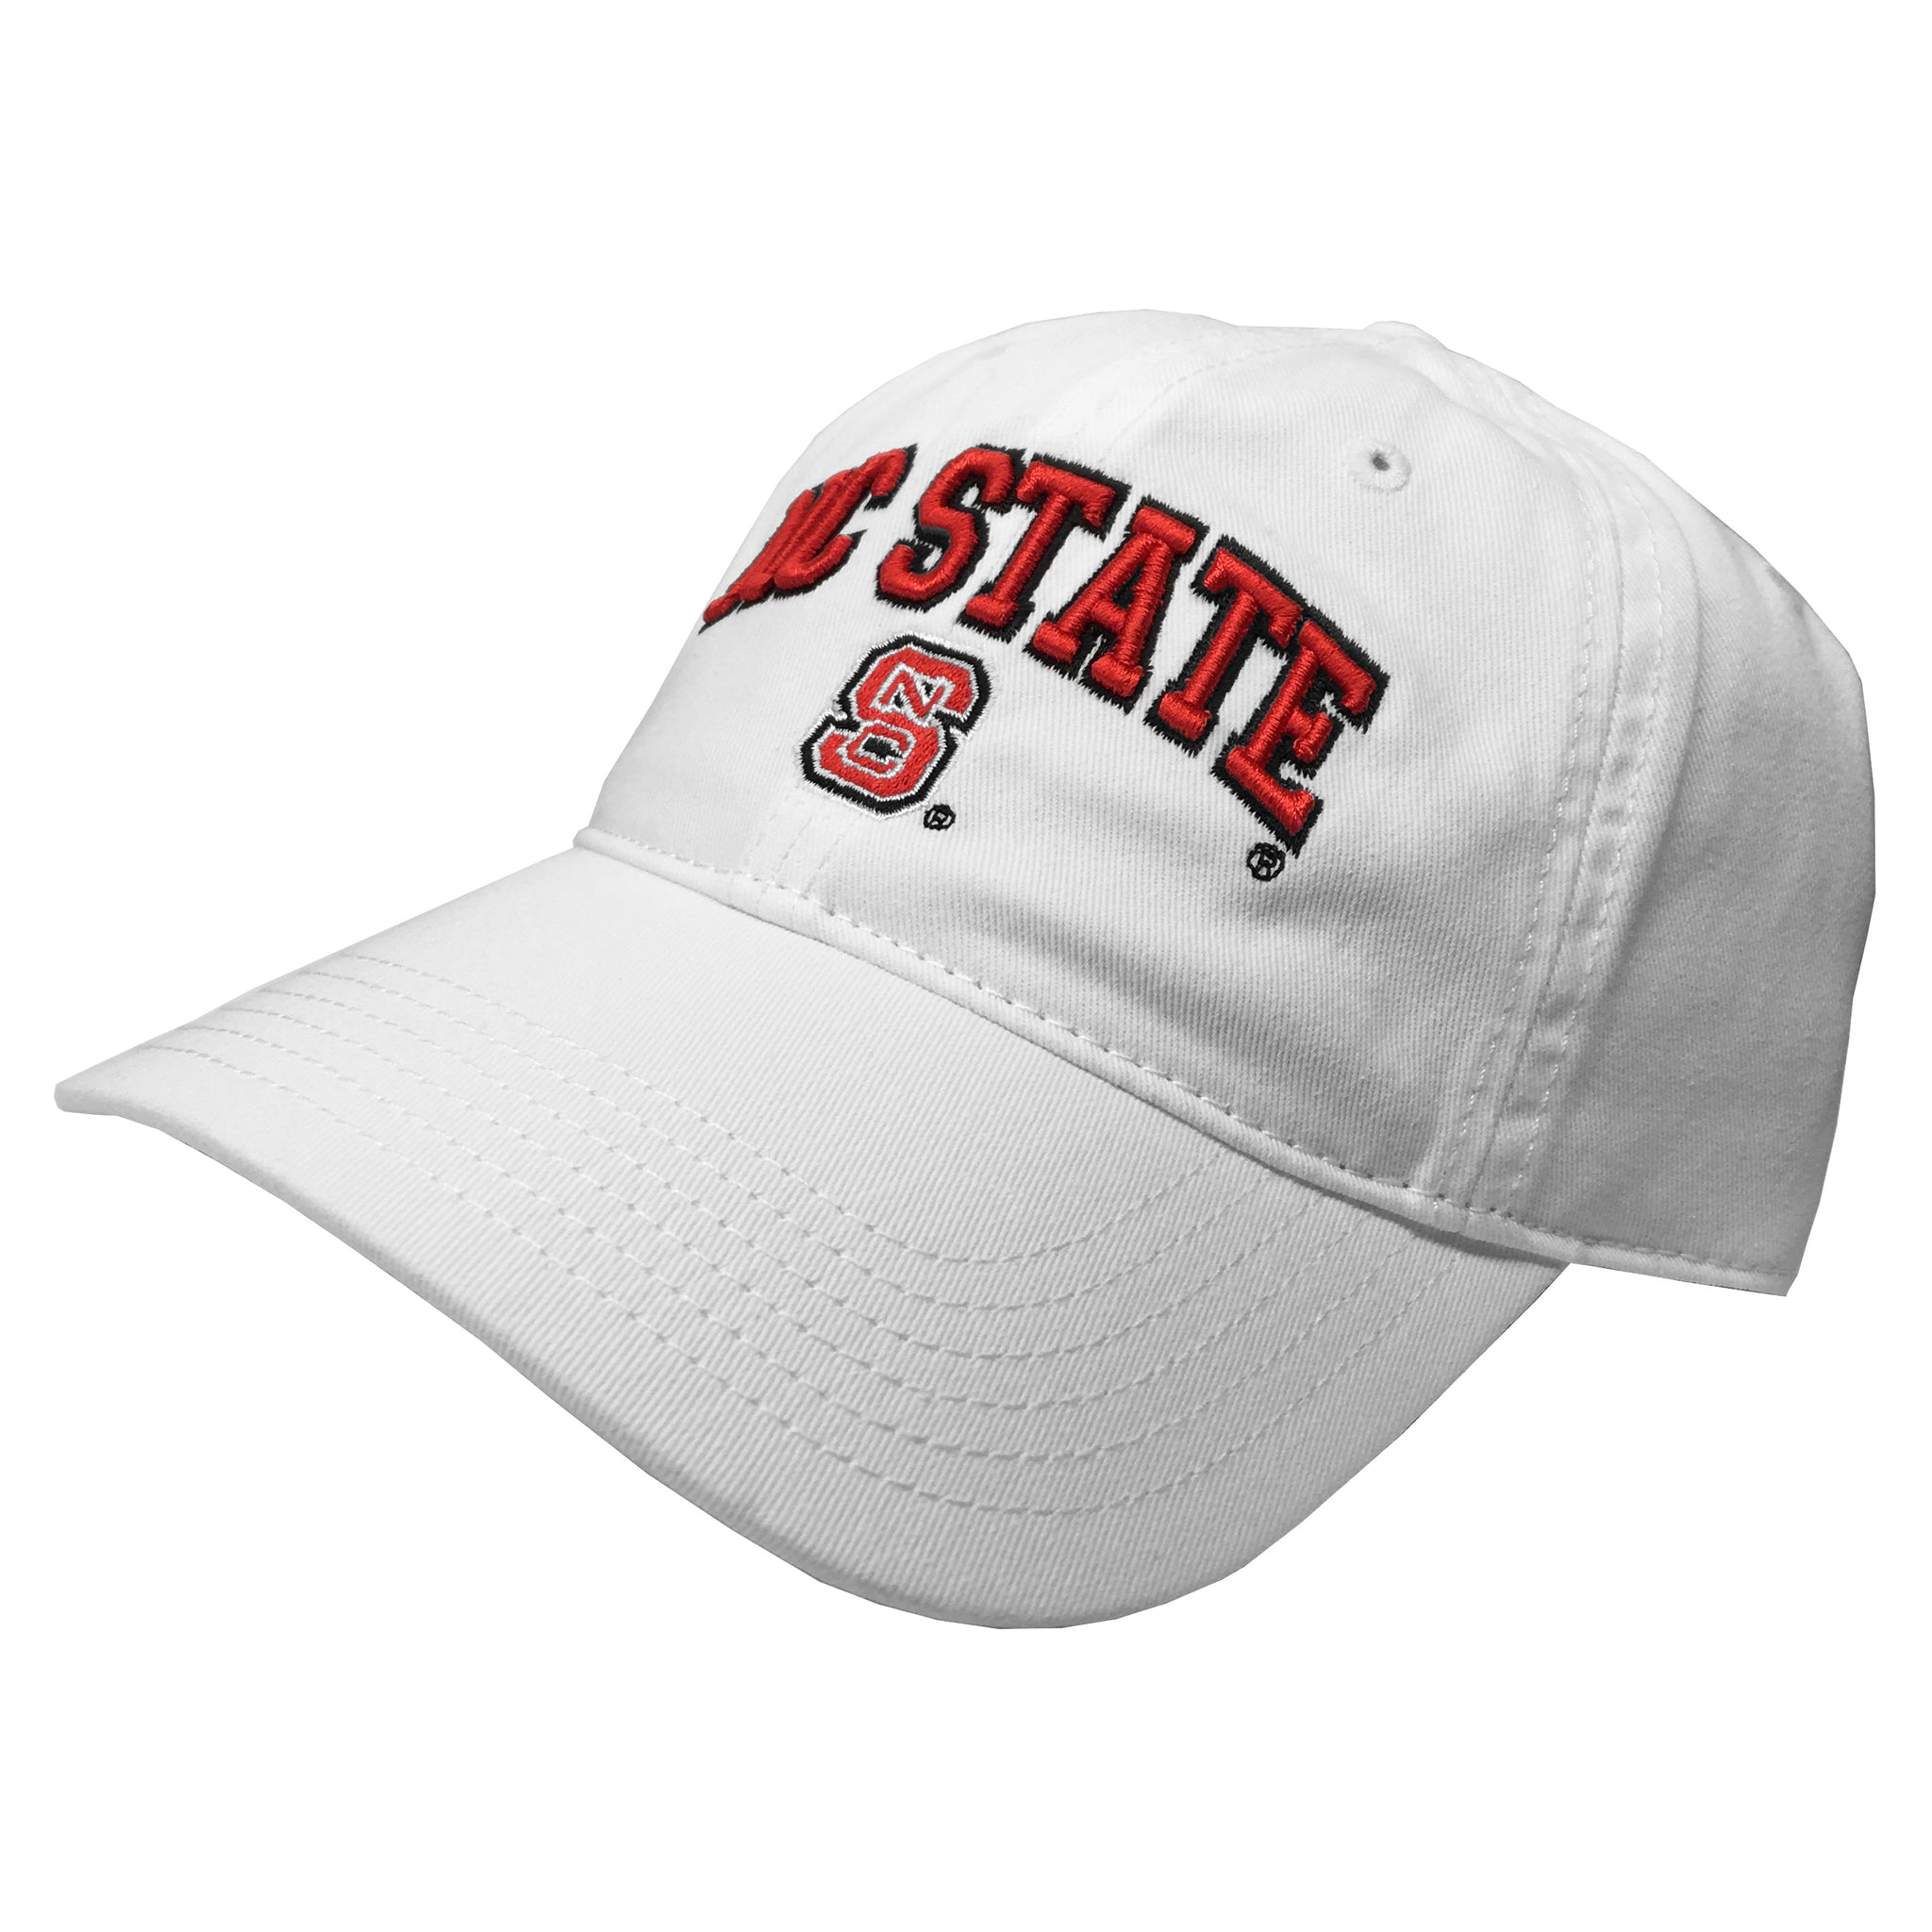 NC State Wolfpack White Block S Relaxed Twill Adjustable Hat